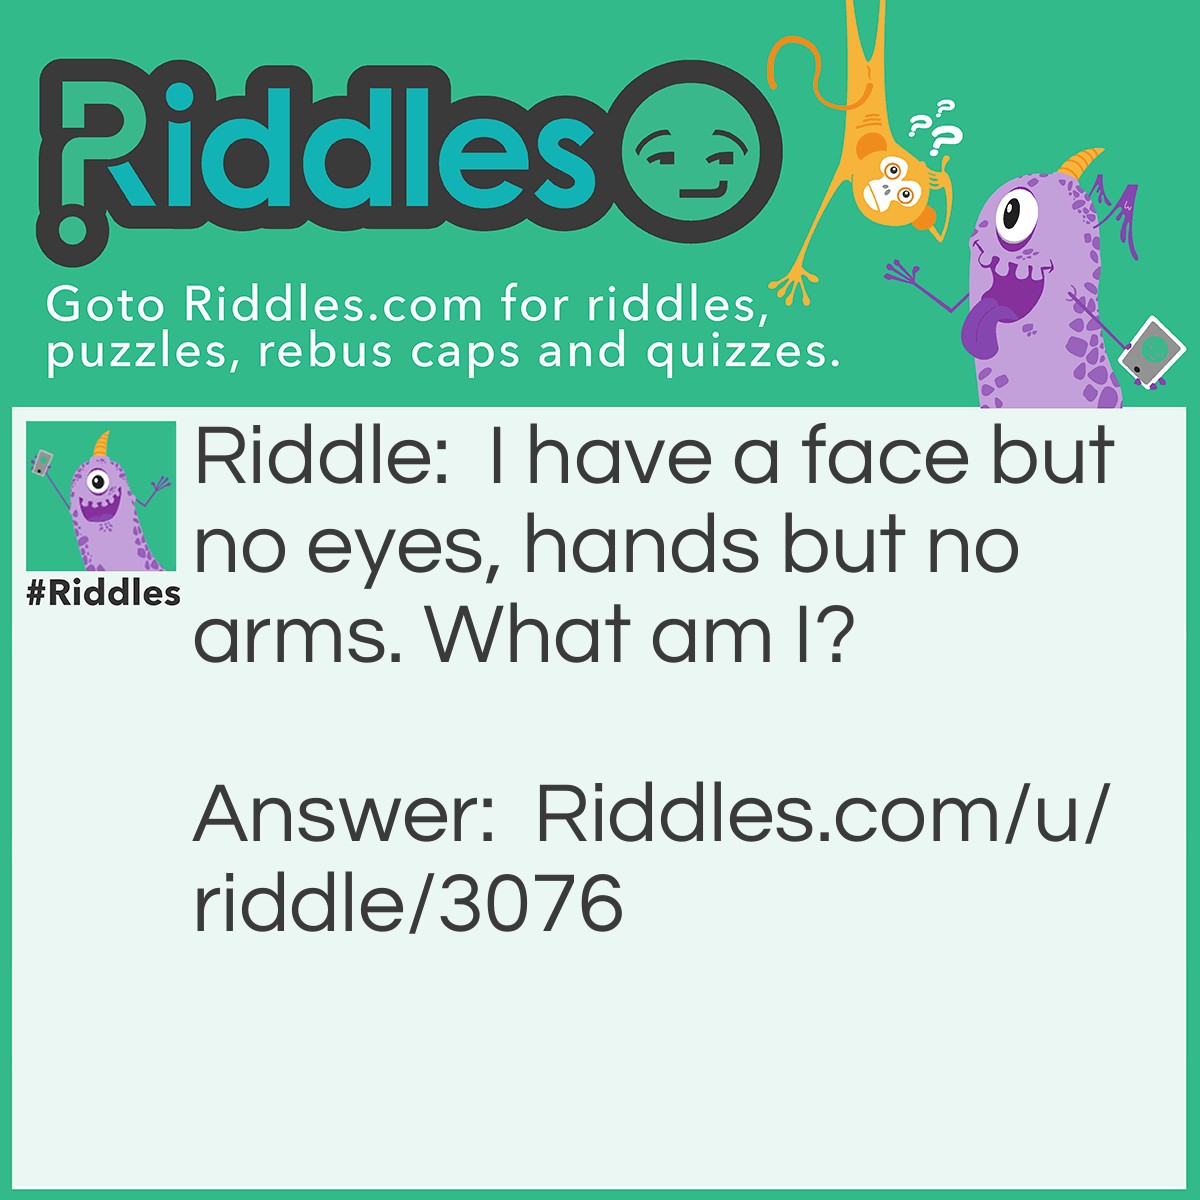 Riddle: I have a face but no eyes, hands but no arms. What am I? Answer: A clock.